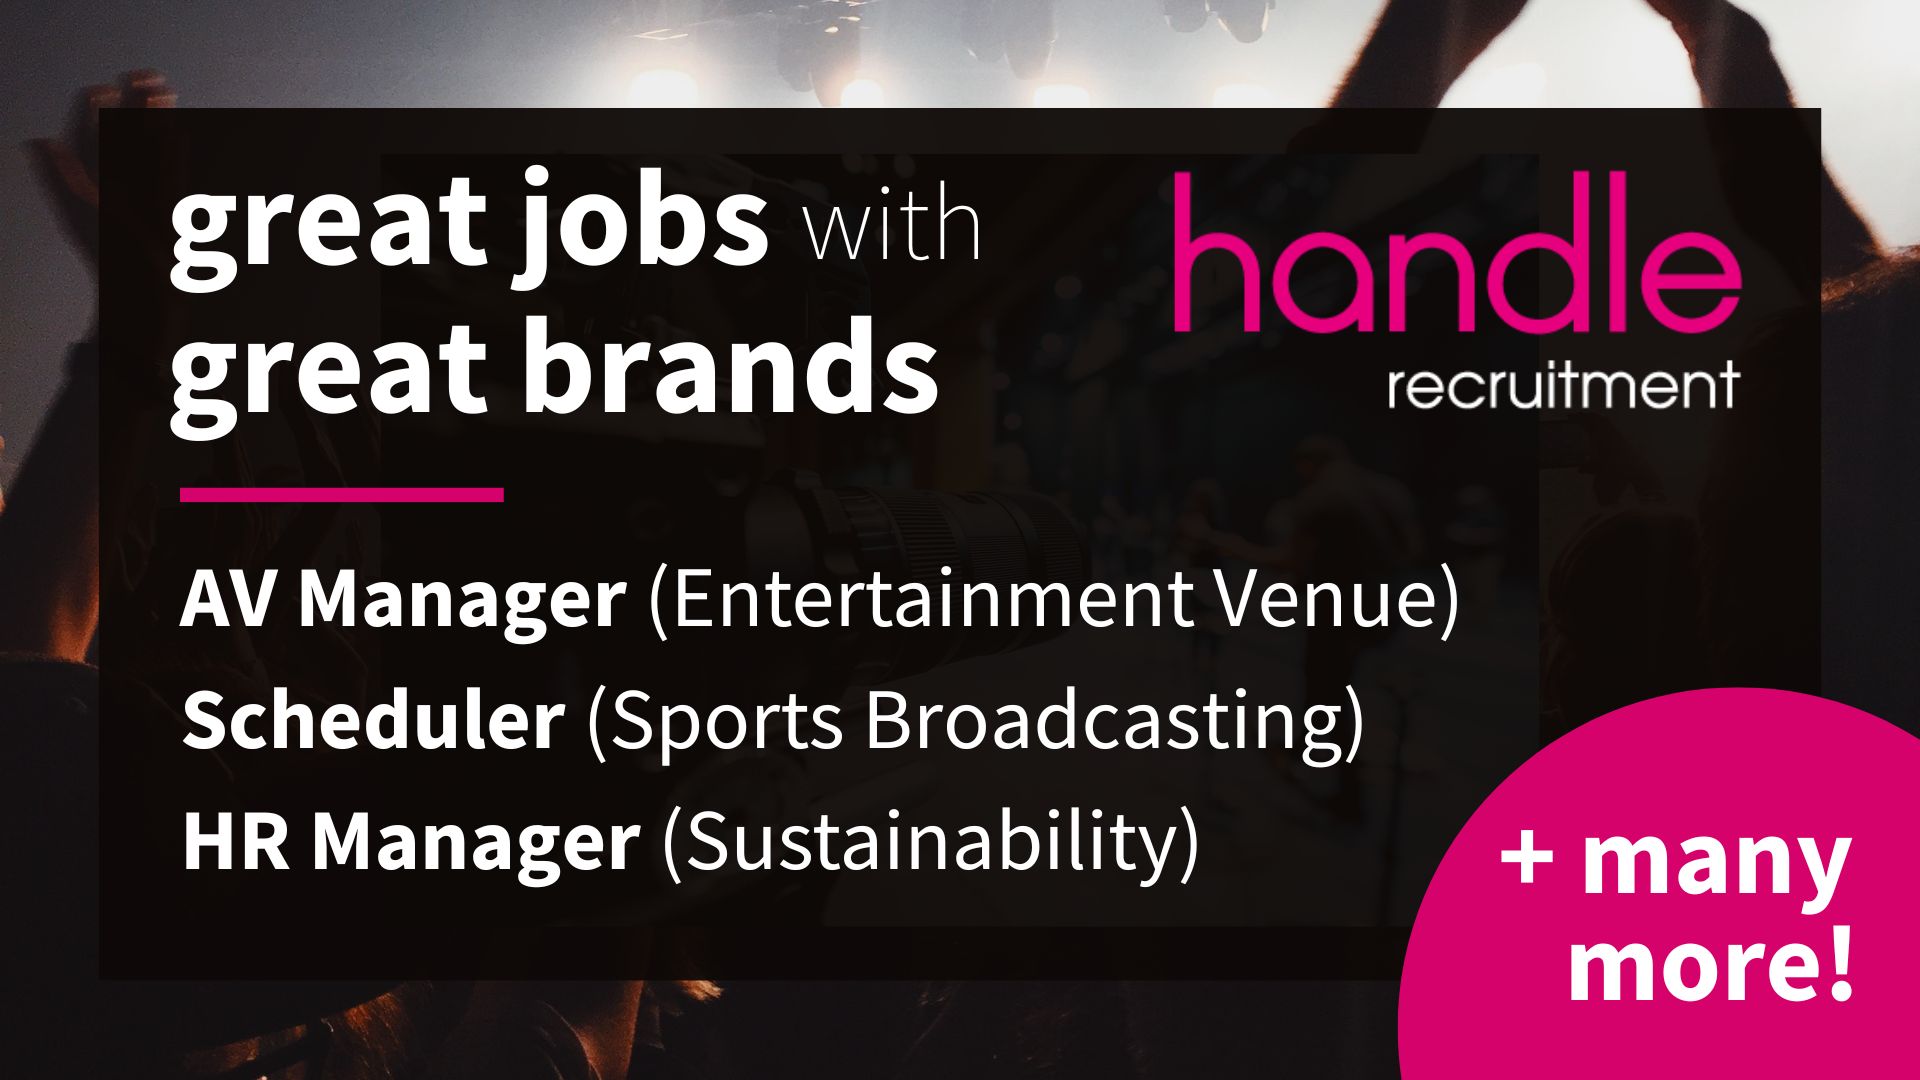 Great Jobs with great brands - Handle Recruitment